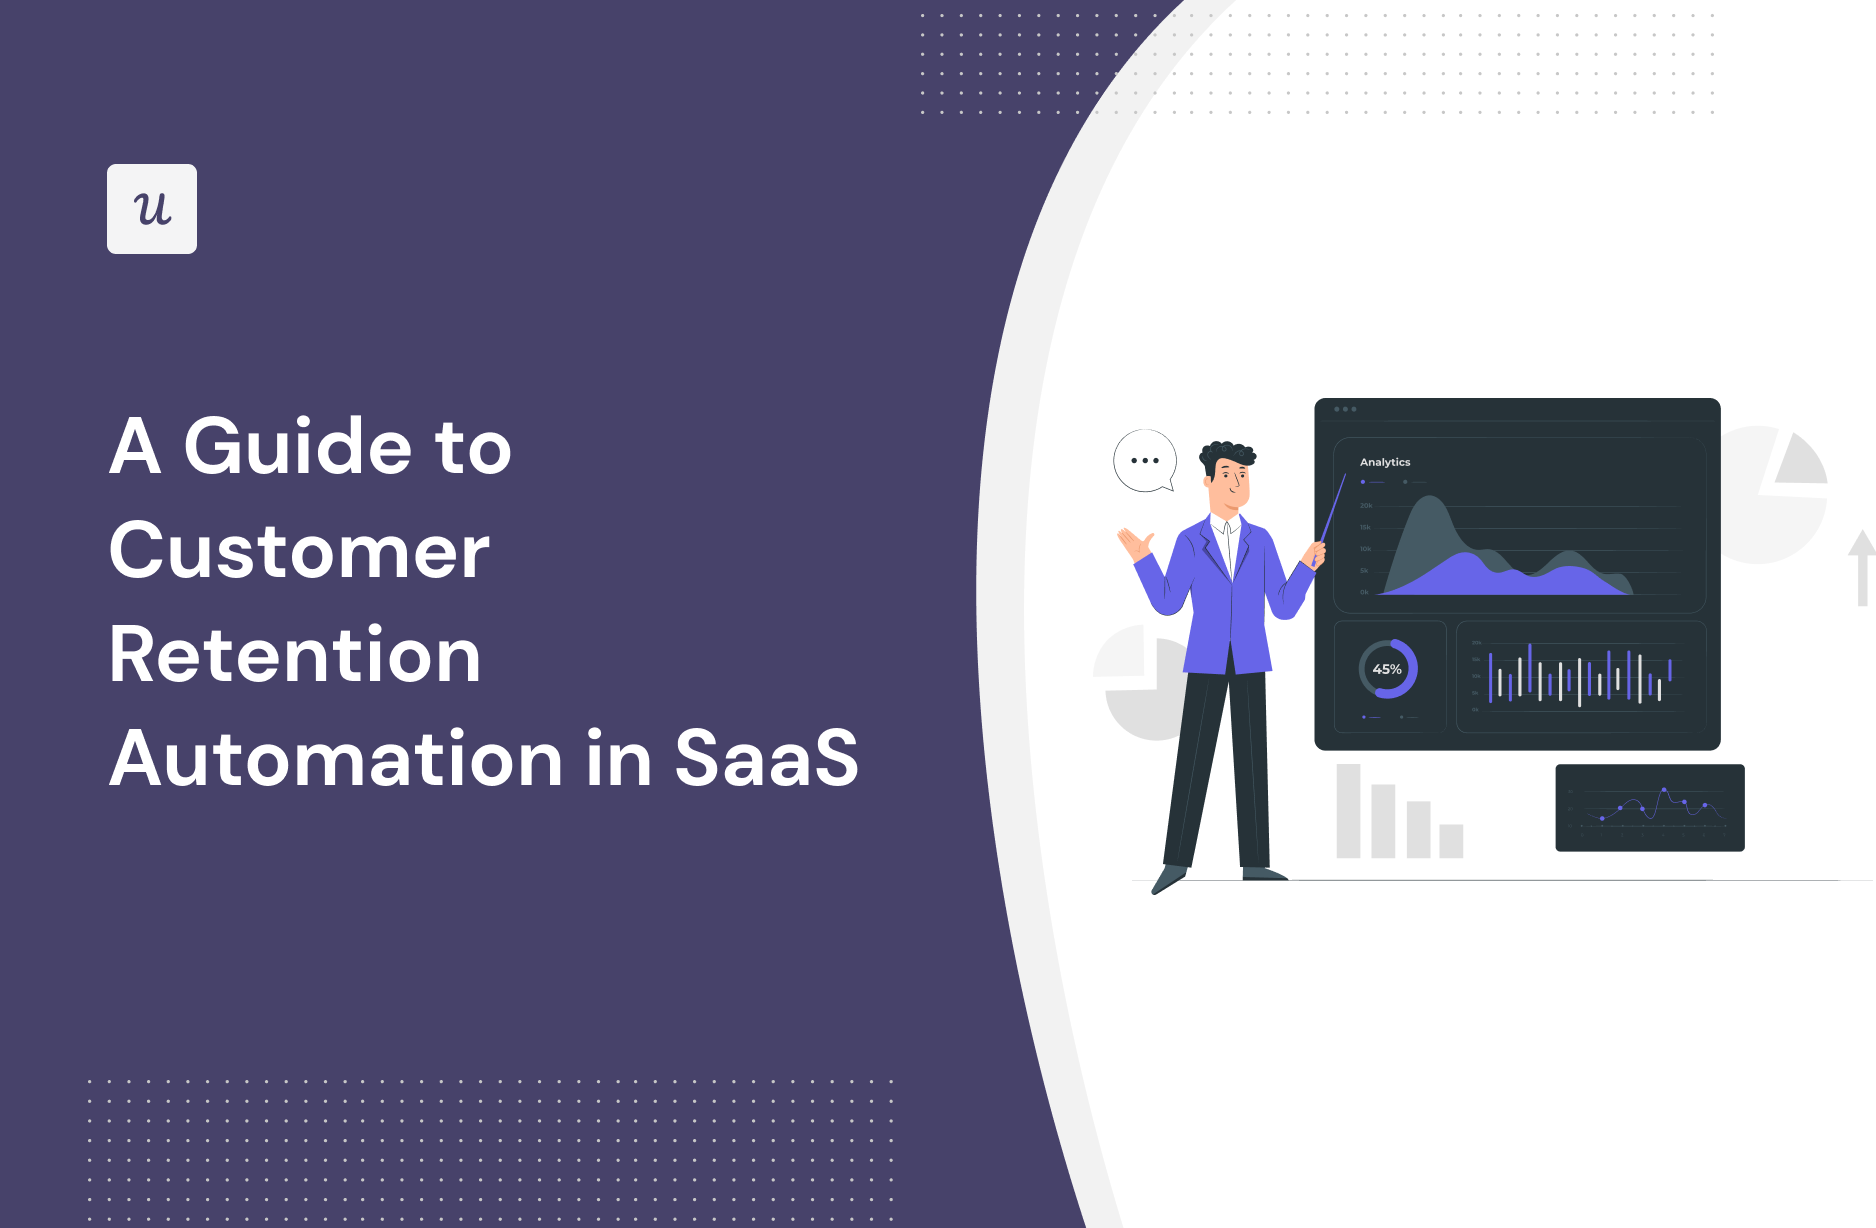 A Guide to Customer Retention Automation in SaaS